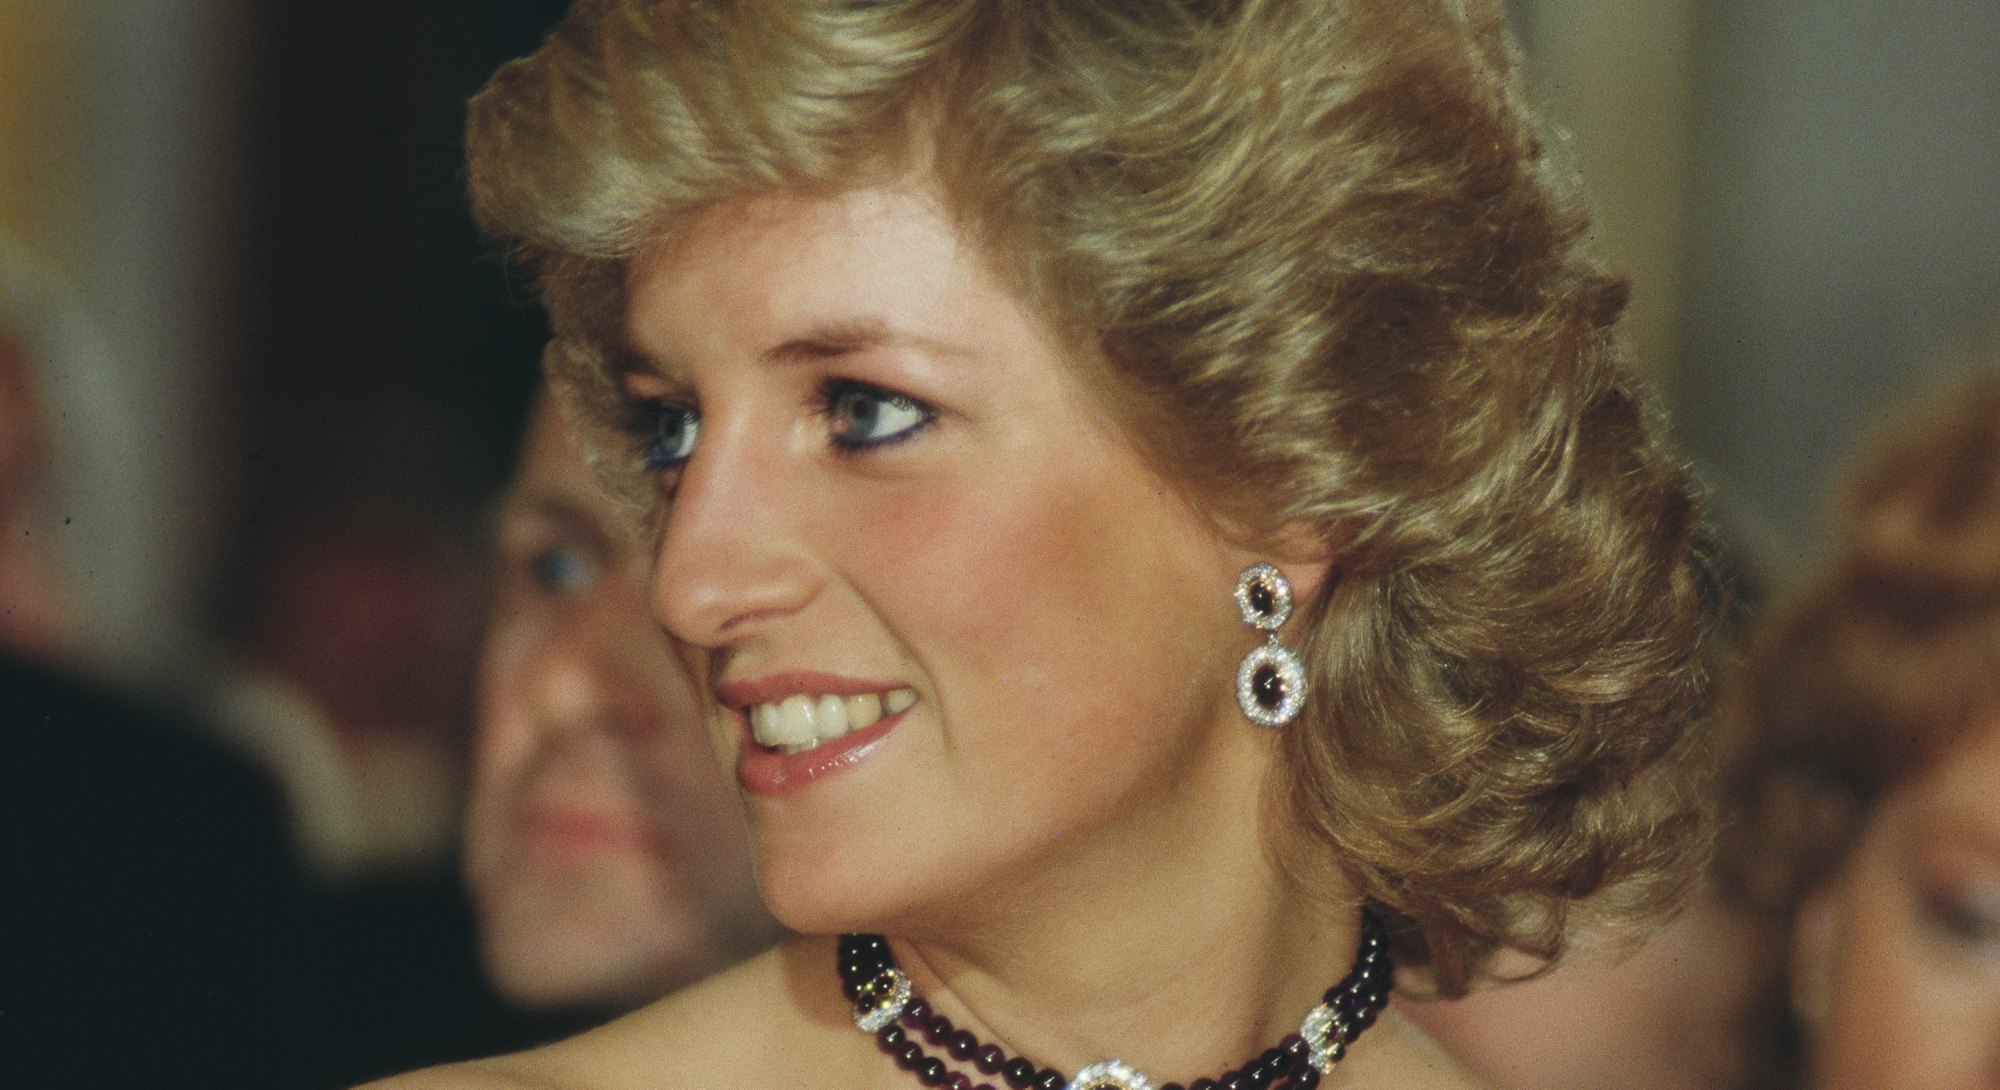 Princess Diana's hair is iconic; here, one of her signature looks.